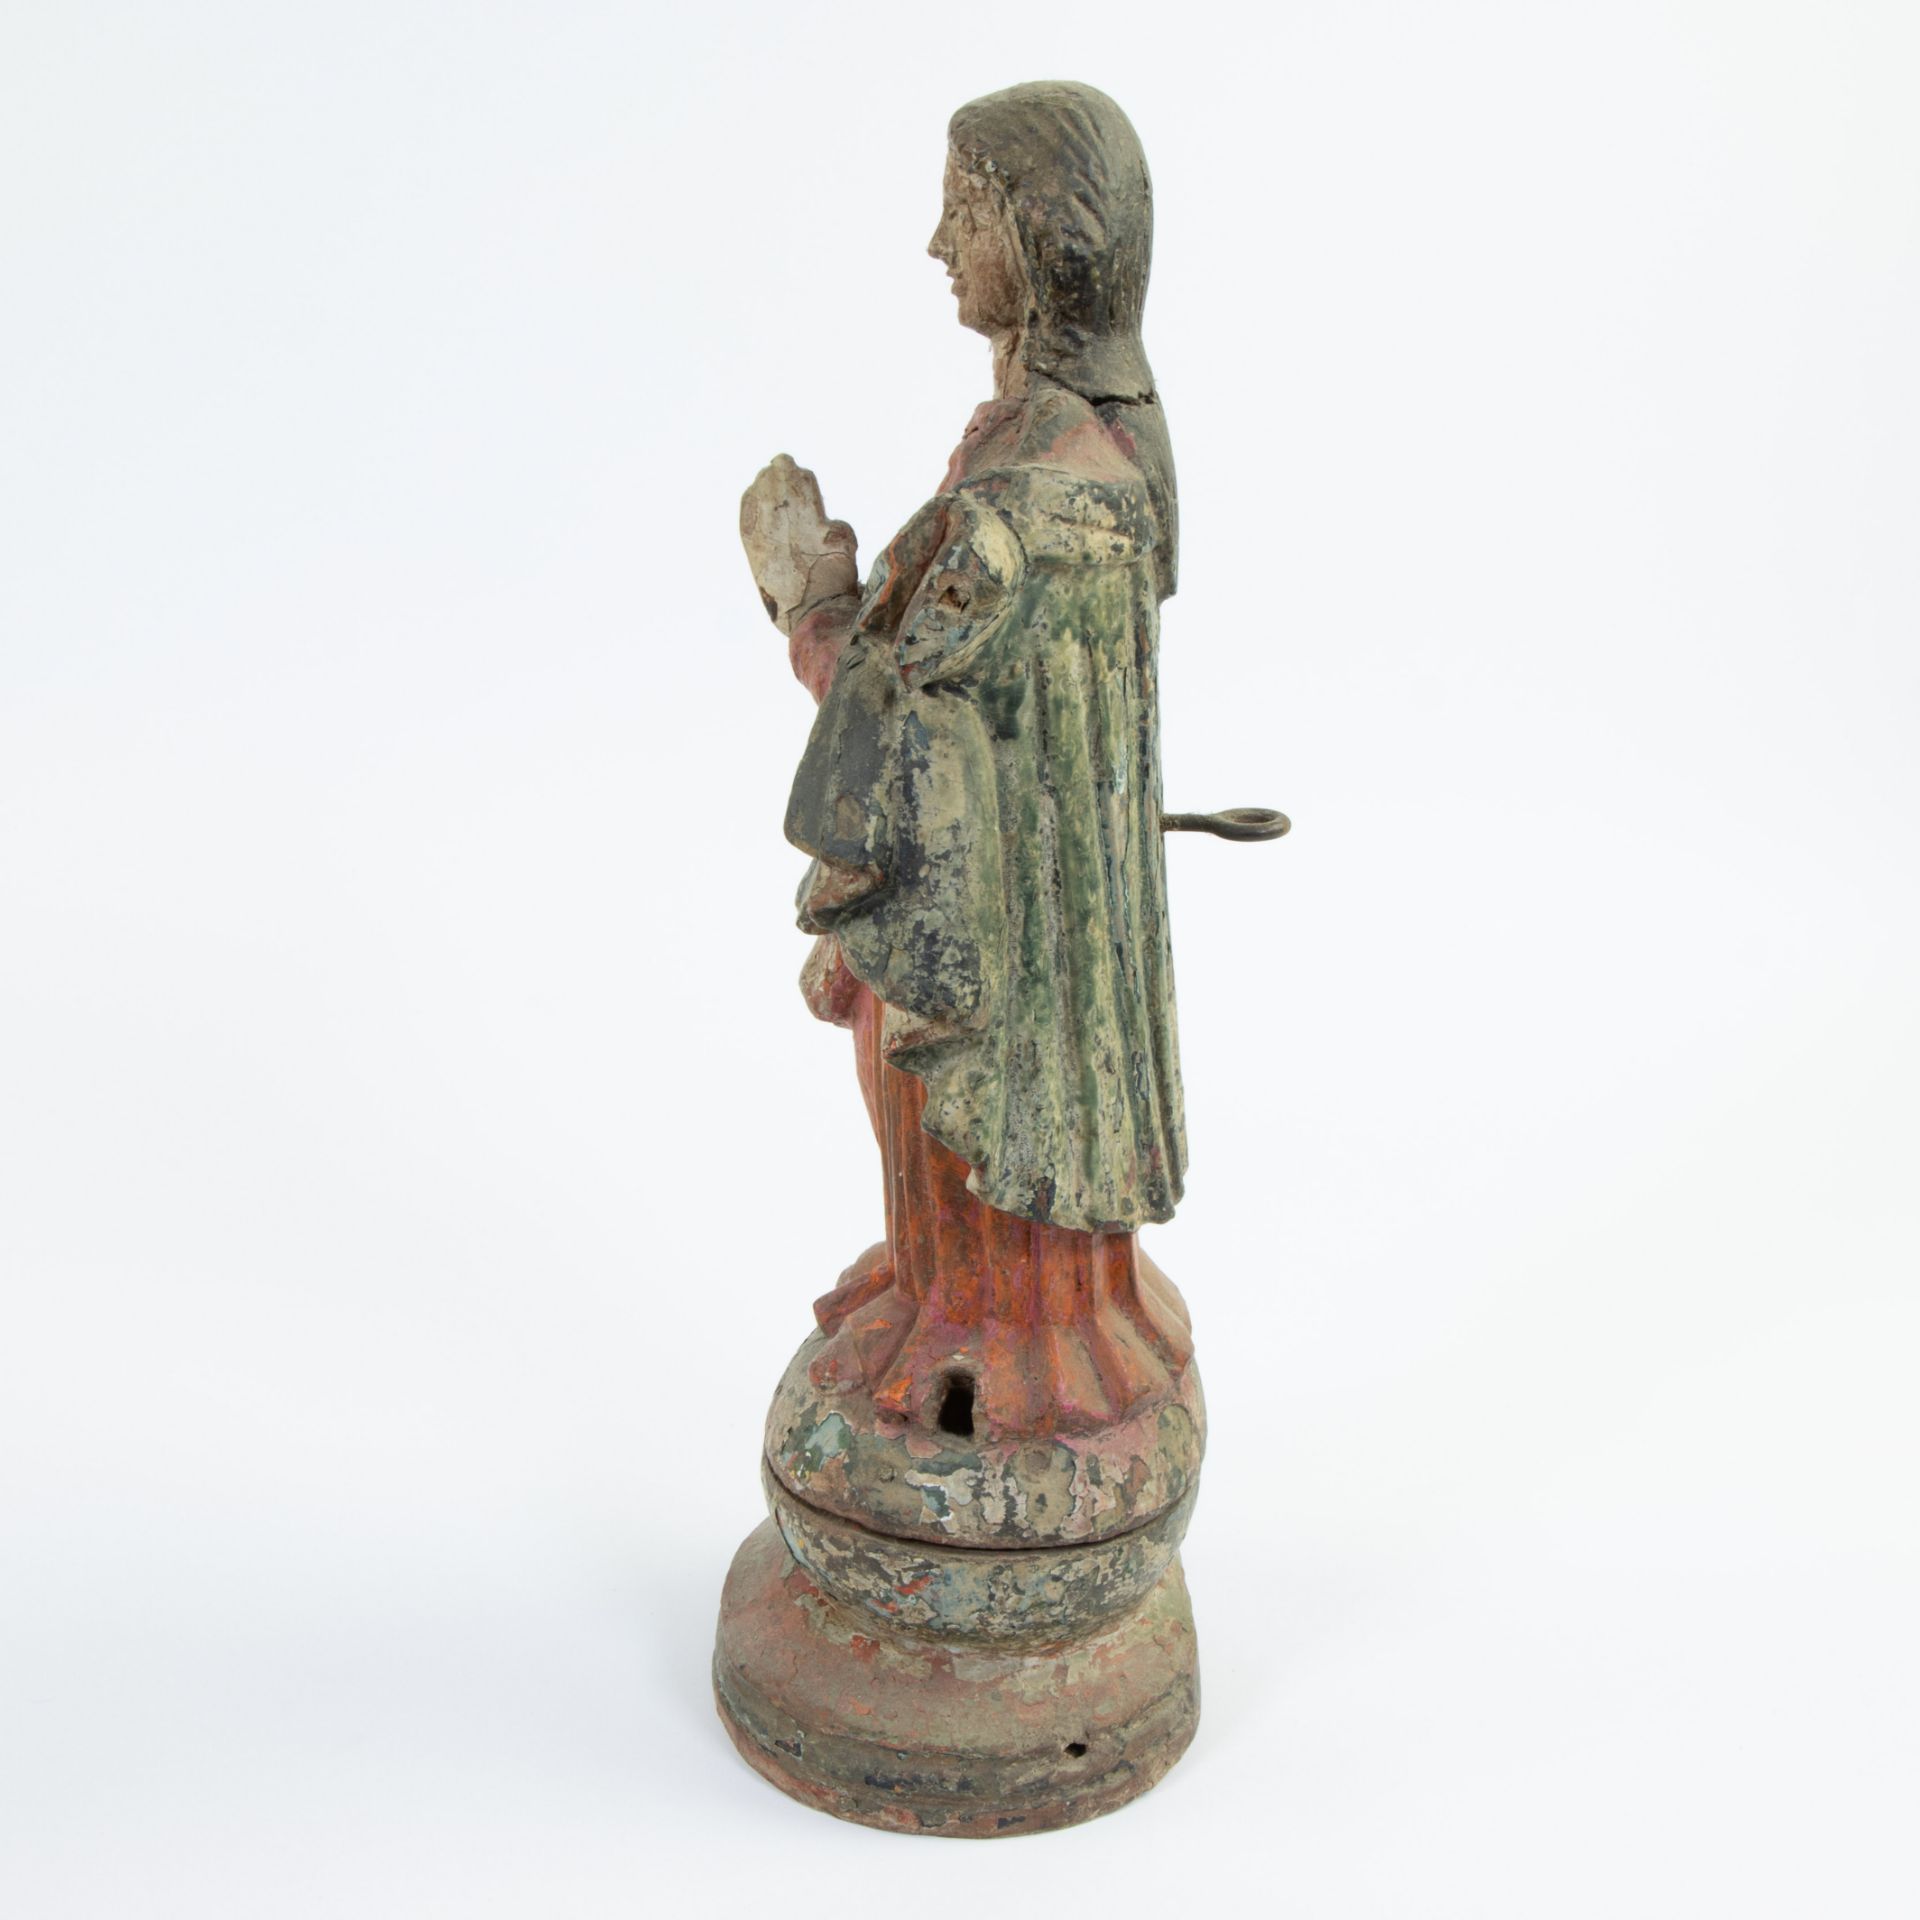 Wooden statue Madonna with original polychromy, Spanish or South America, 18th century - Image 2 of 4